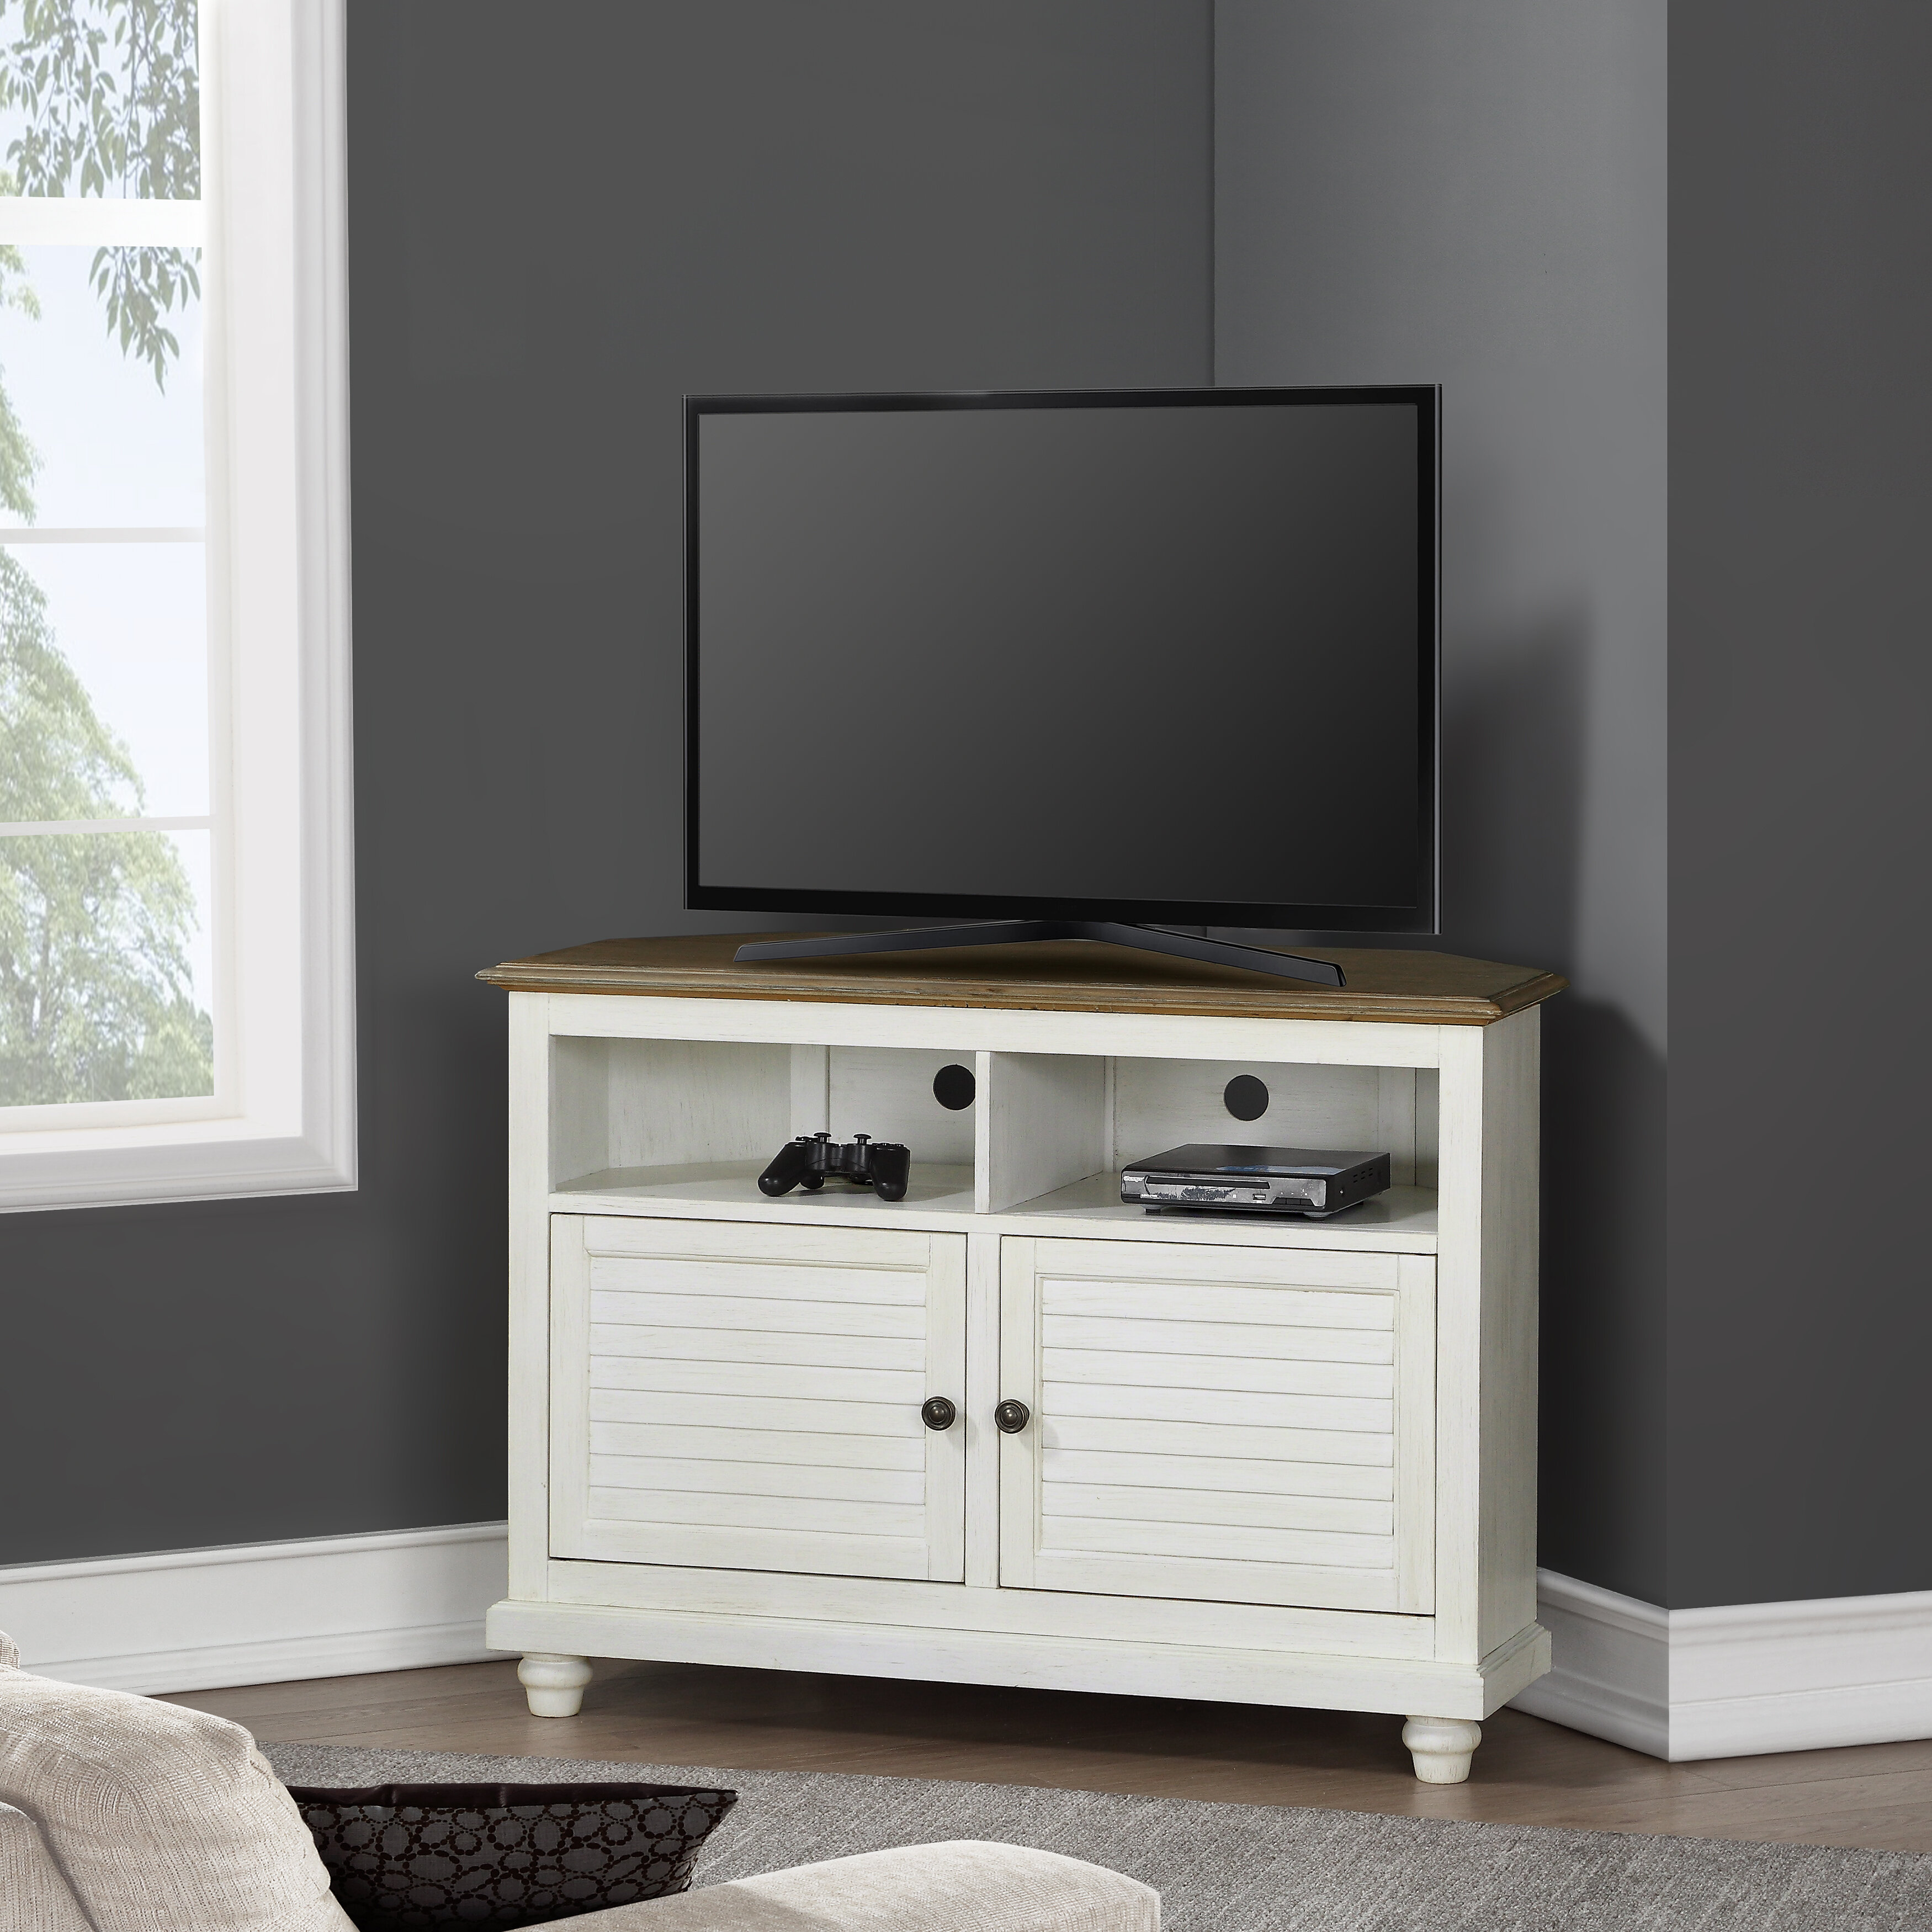 Featured image of post White Tv Stand Wood Top / This tv stand is rendered from reclaimed wood with beveled edges.